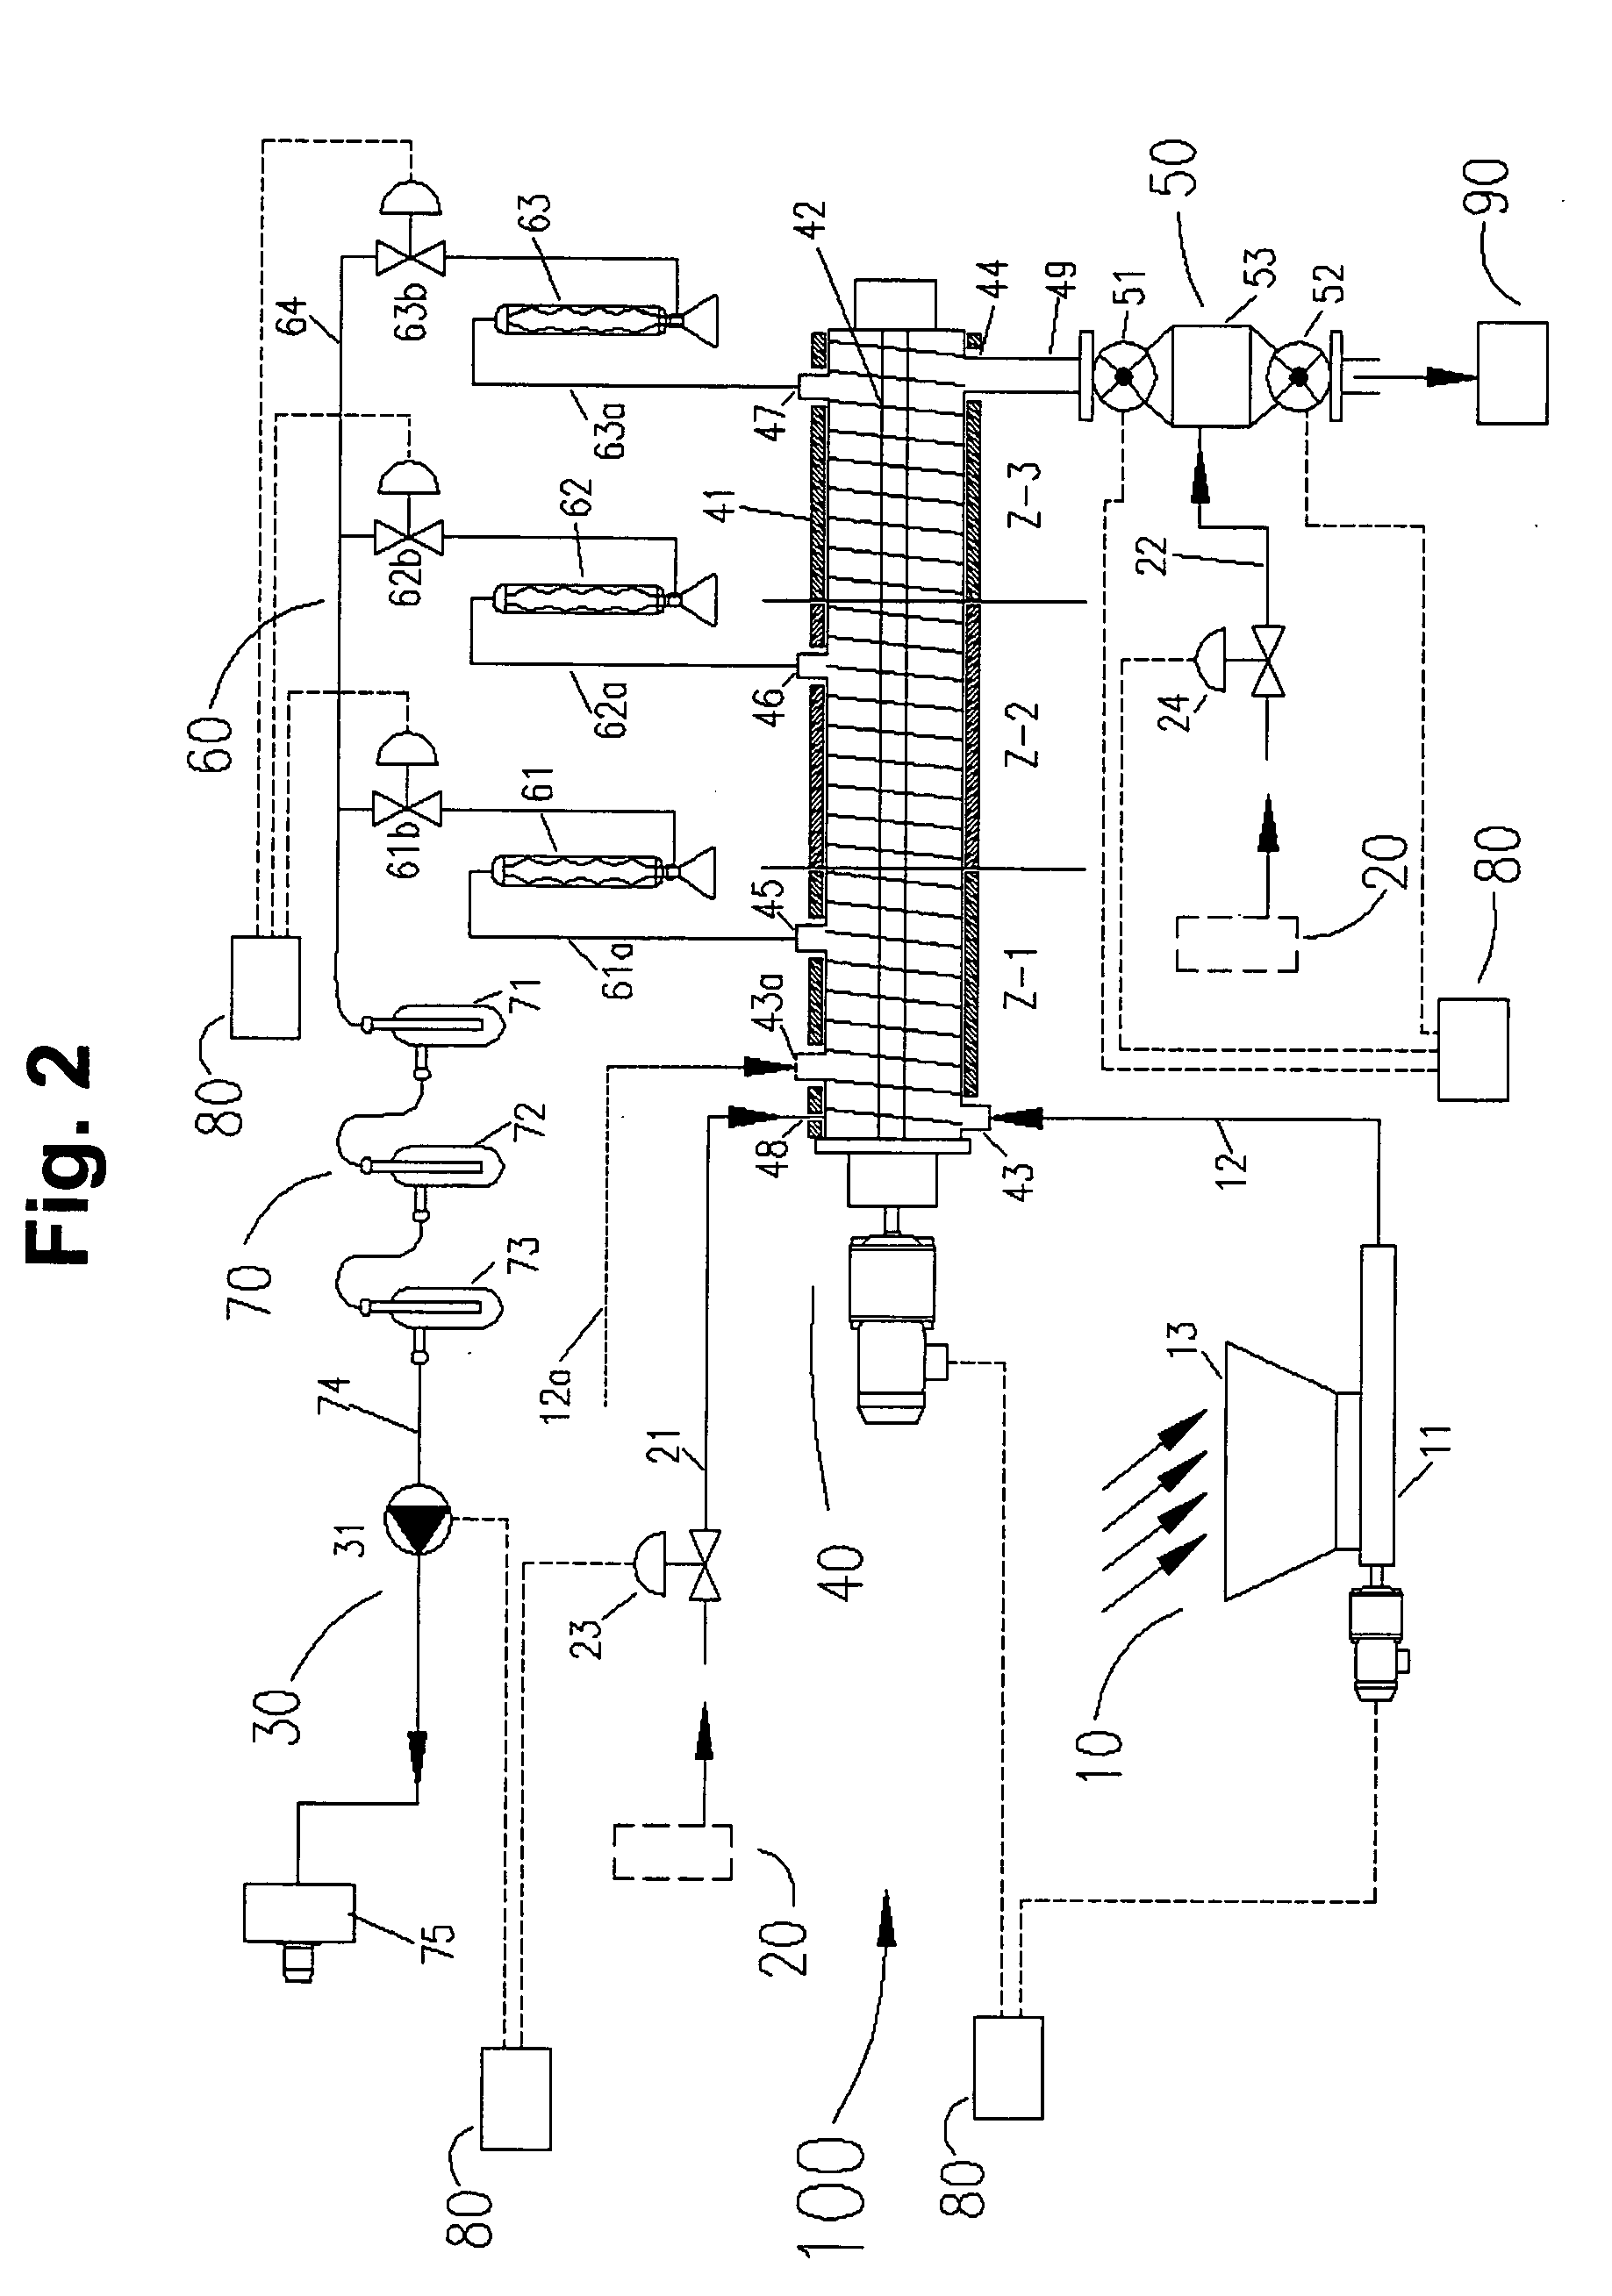 System and process for the treatment of multiphase residues